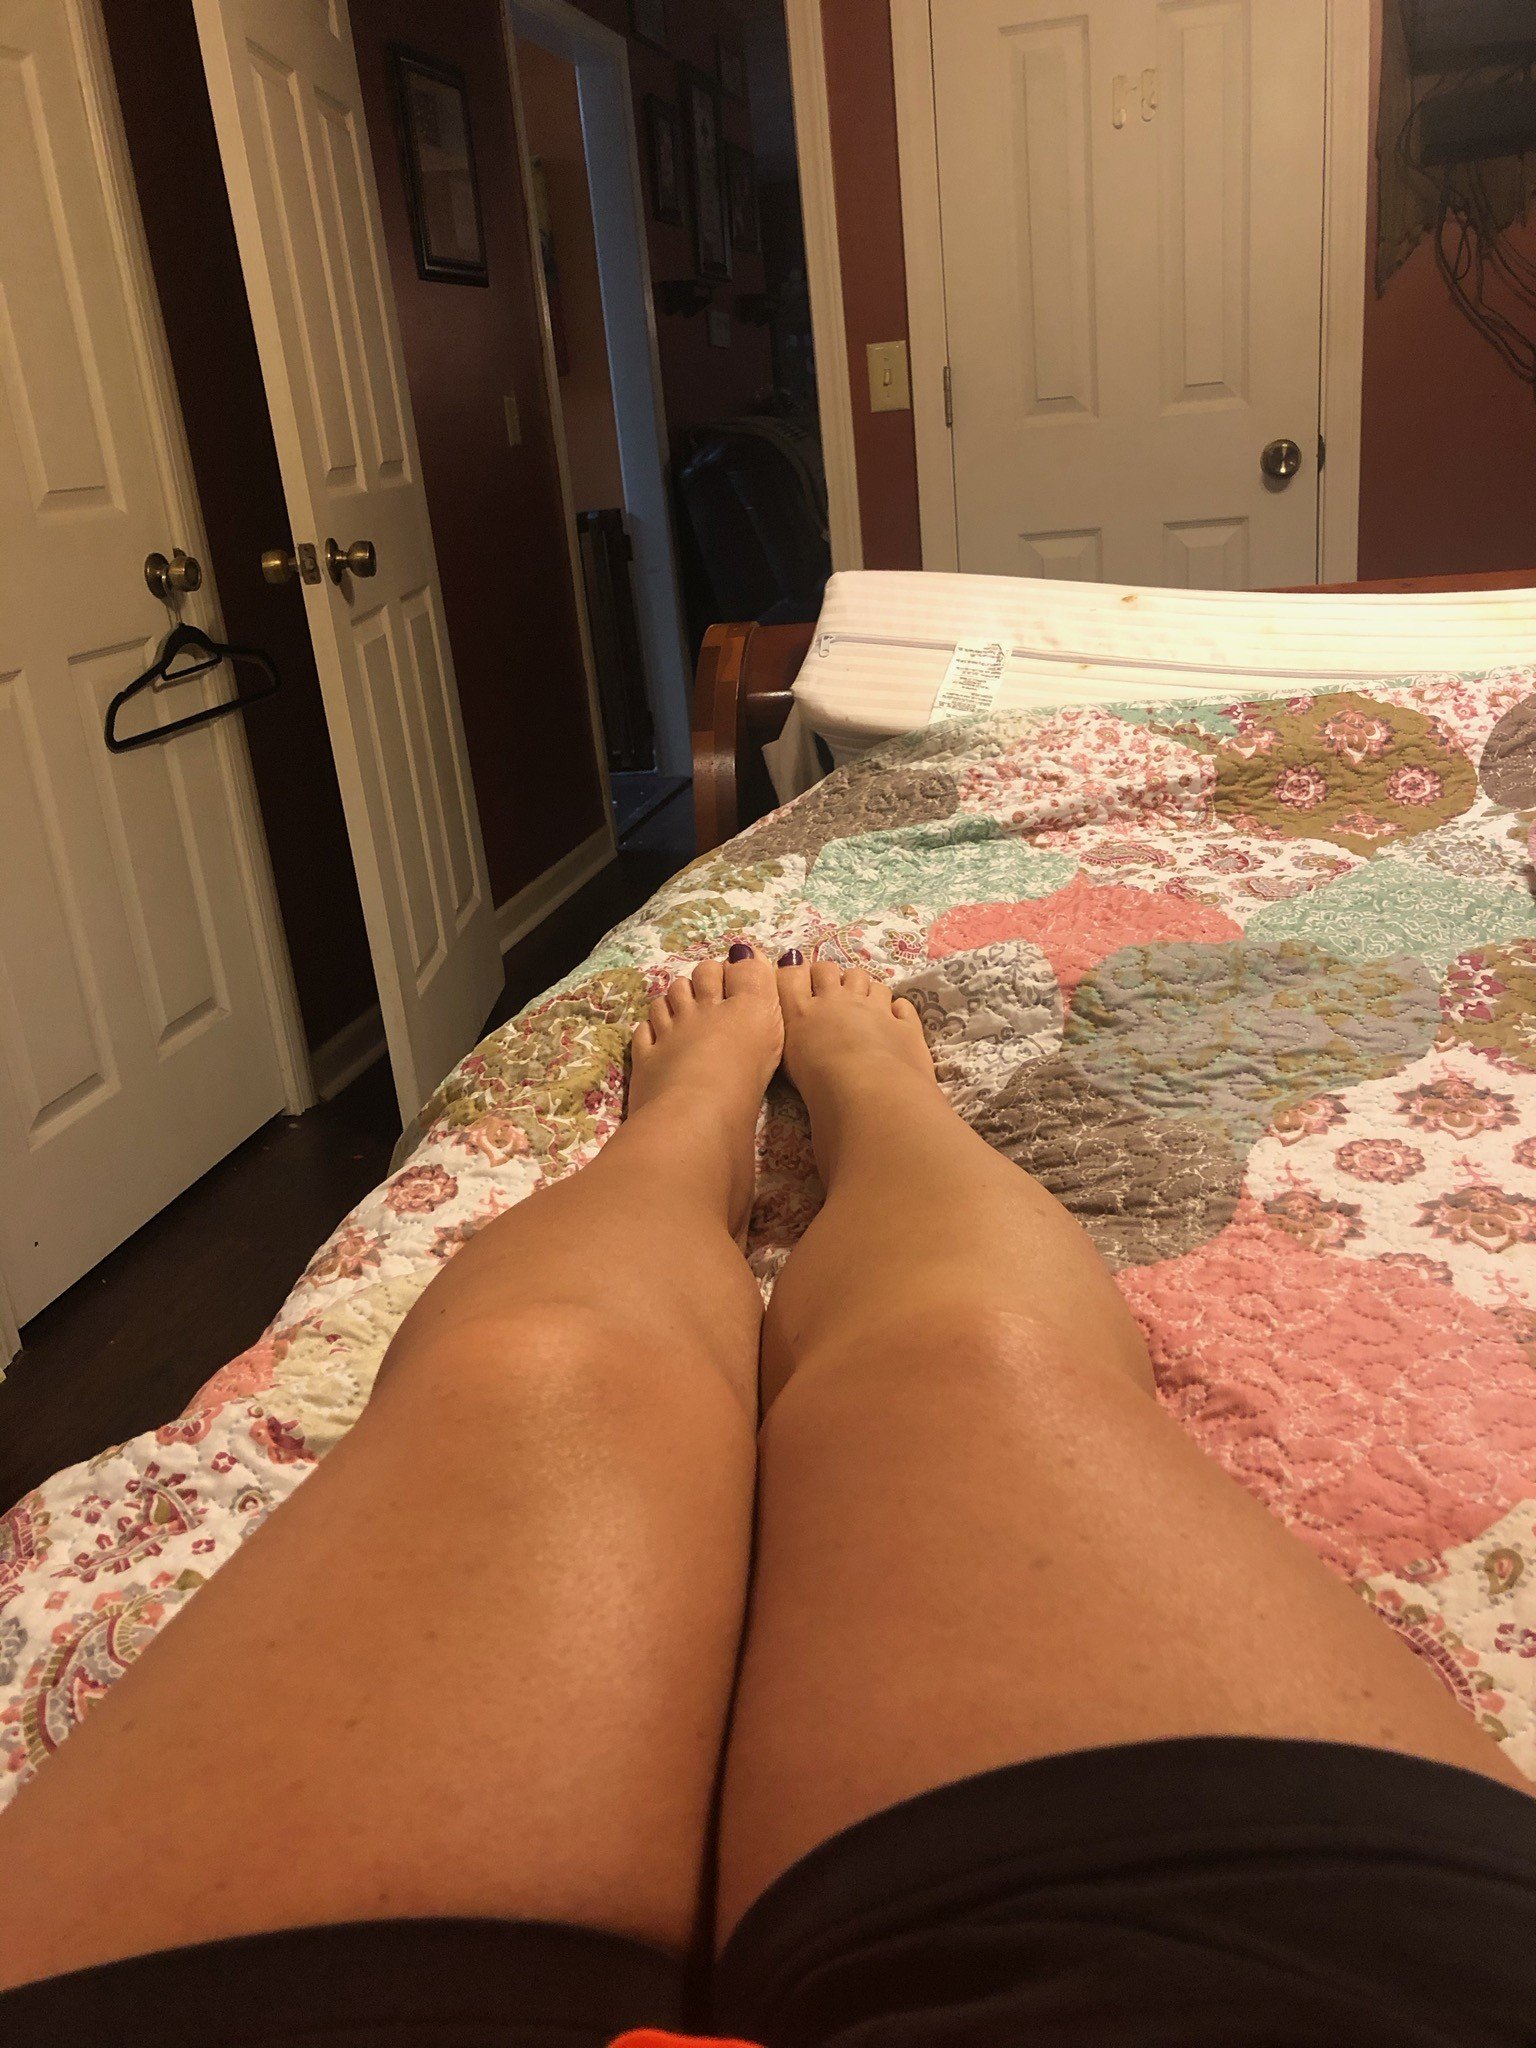 Photo by Subbottom1968 with the username @Subbottom1968,  August 14, 2020 at 3:21 PM. The post is about the topic Sexy real milfs and the text says 'tell me what you would do with my wifes legs'